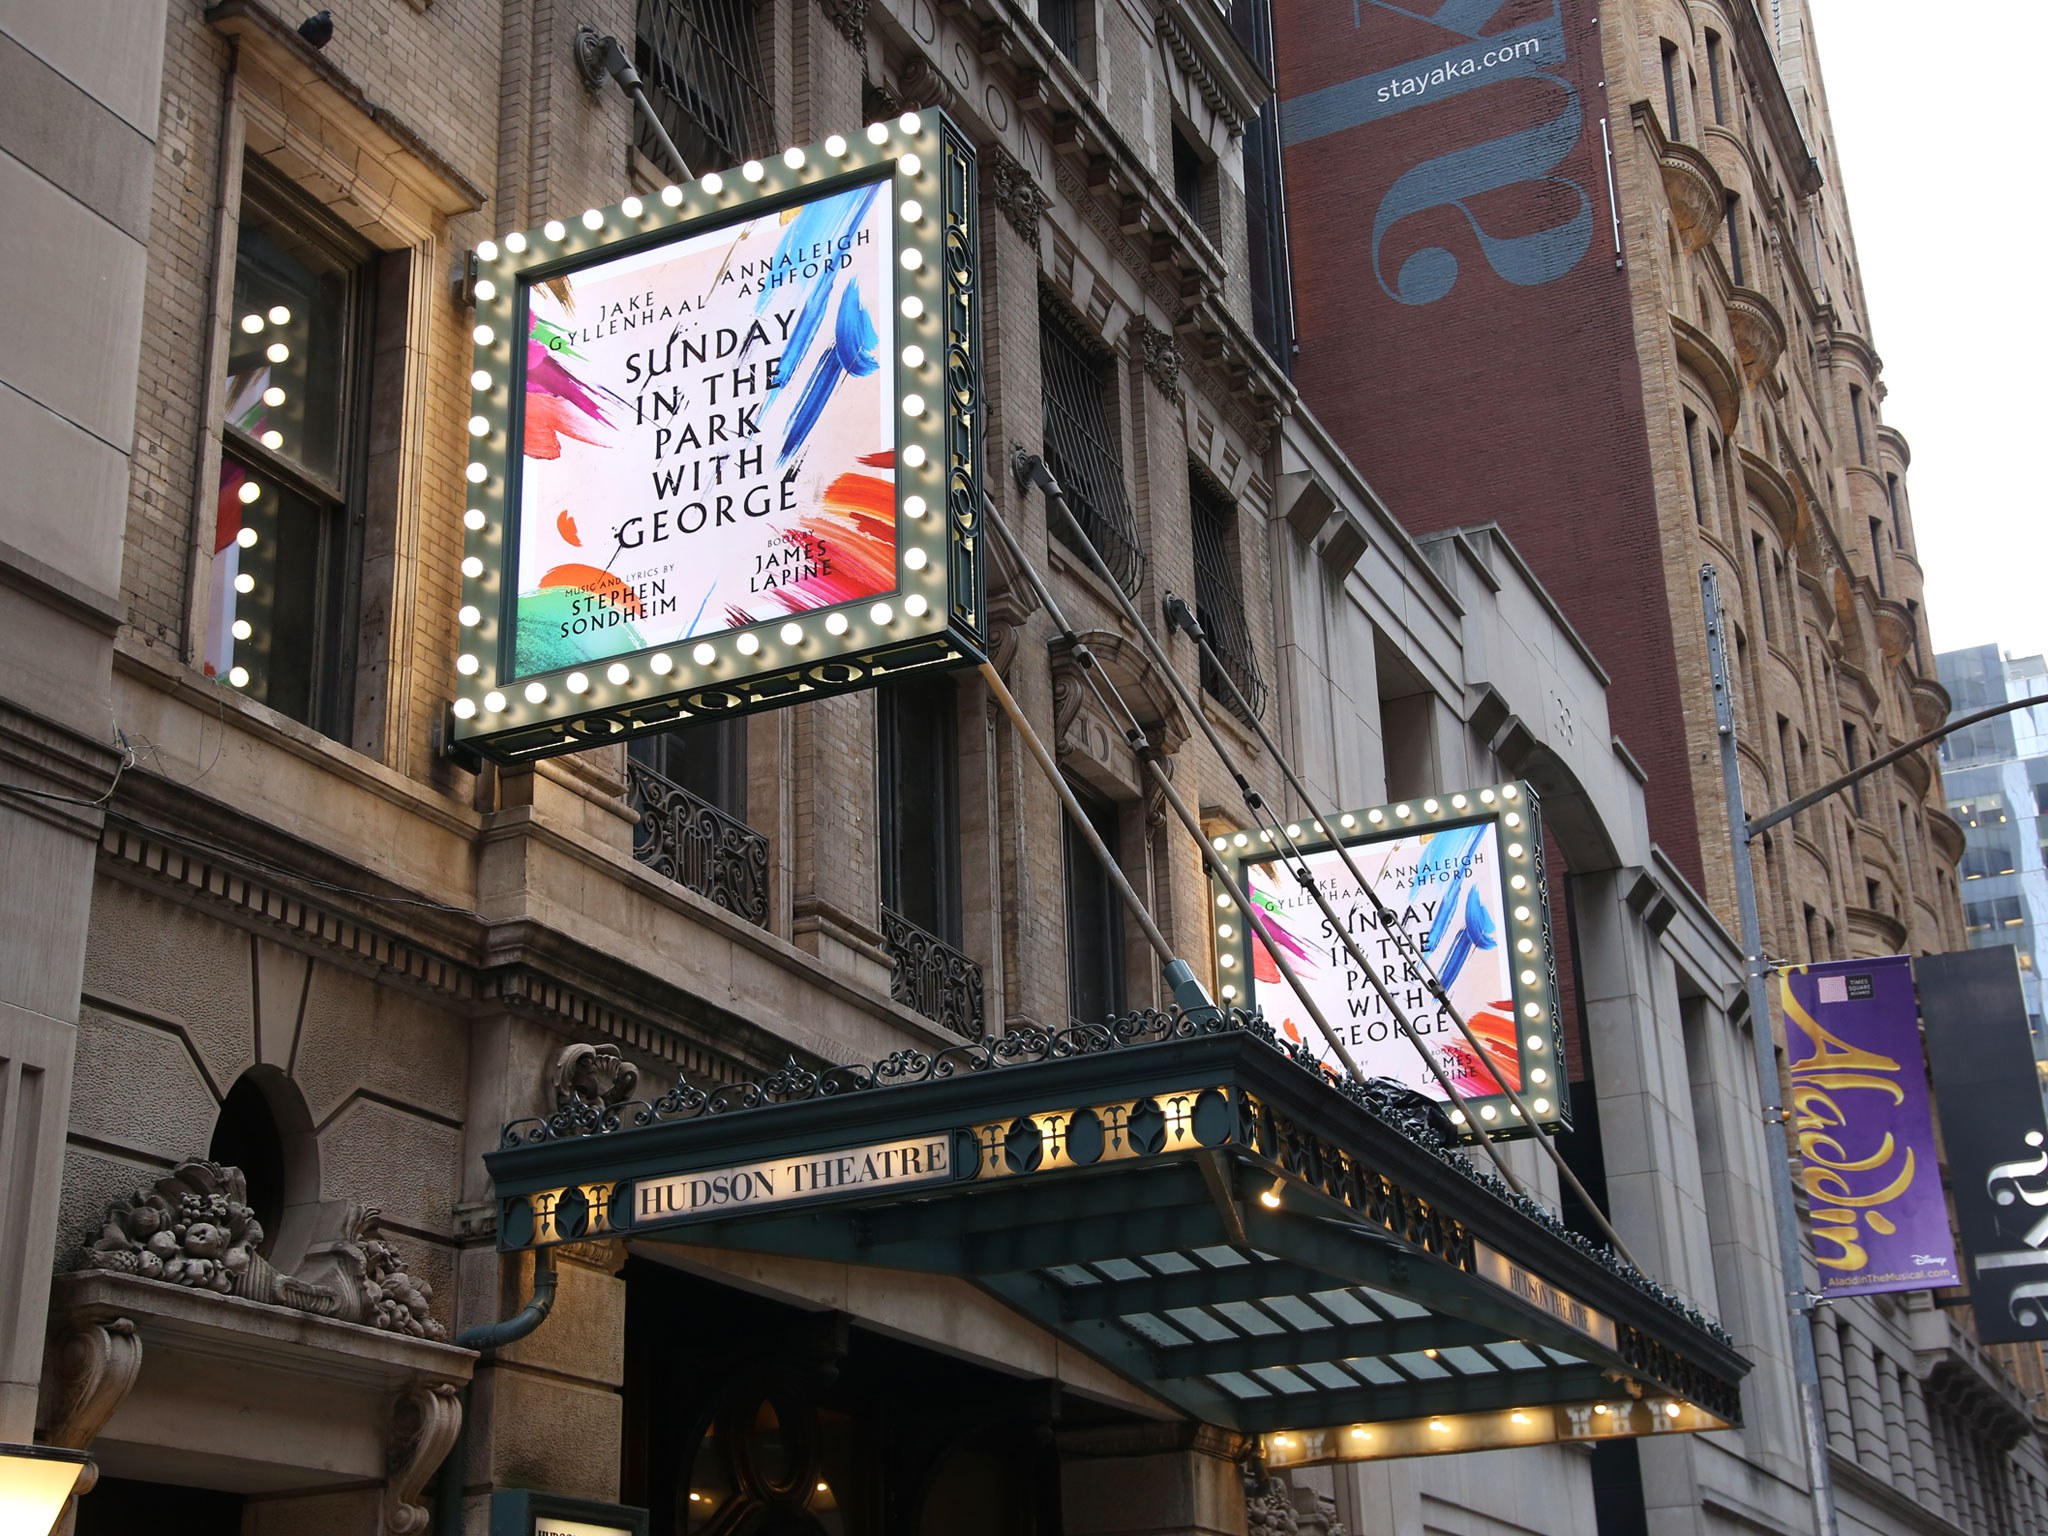 Sunday in the park Broadway Theatre Marquee